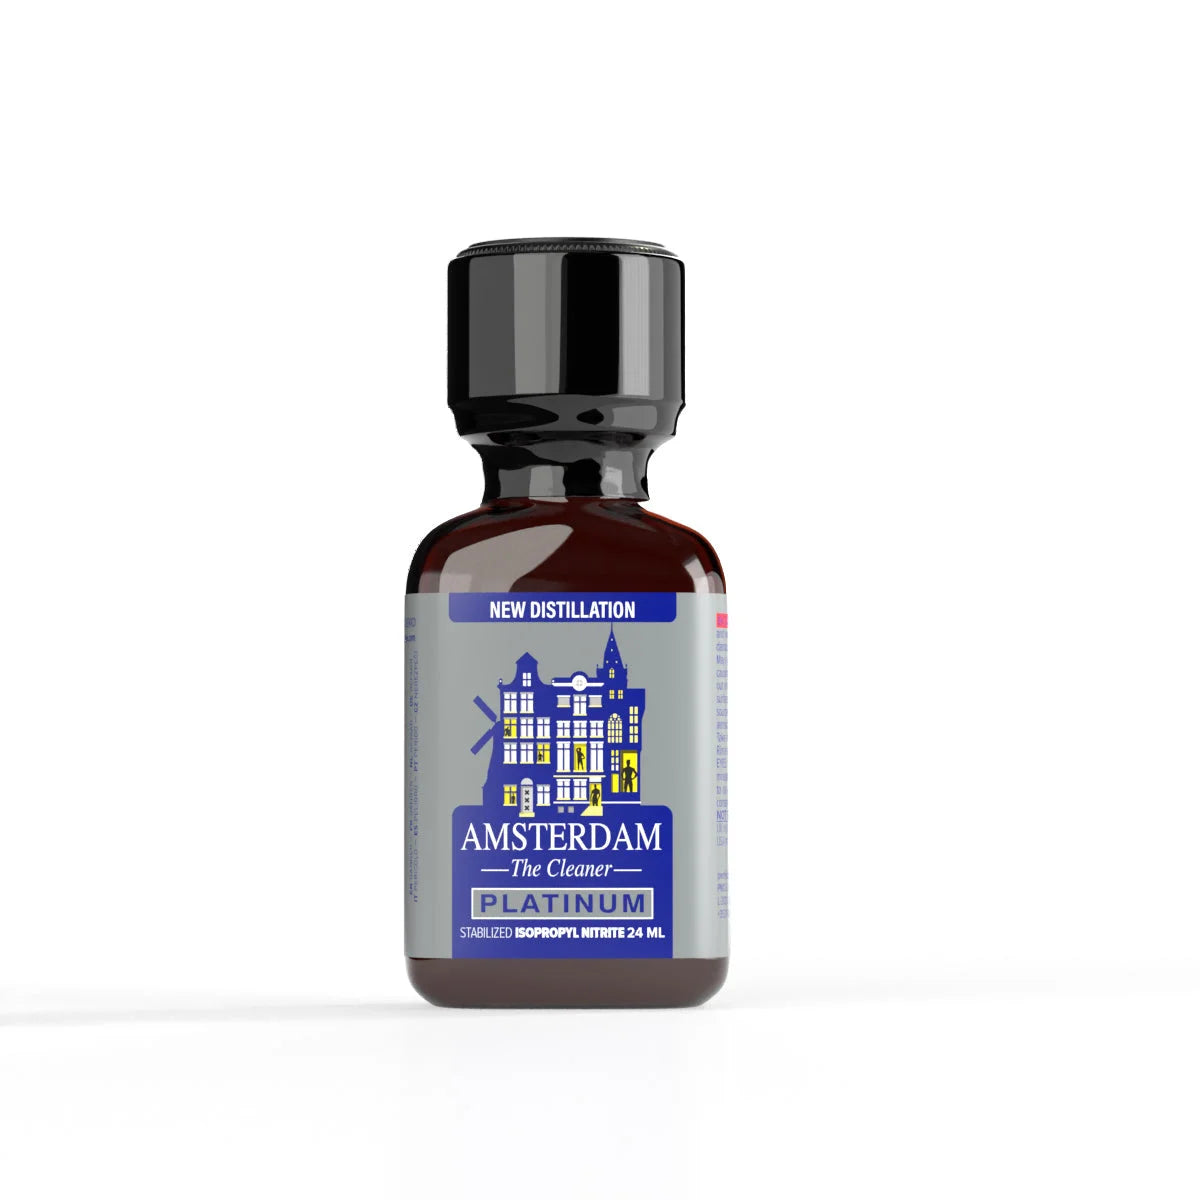 A product photo of a 24ml bottle of Amsterdam Platinum Poppers.